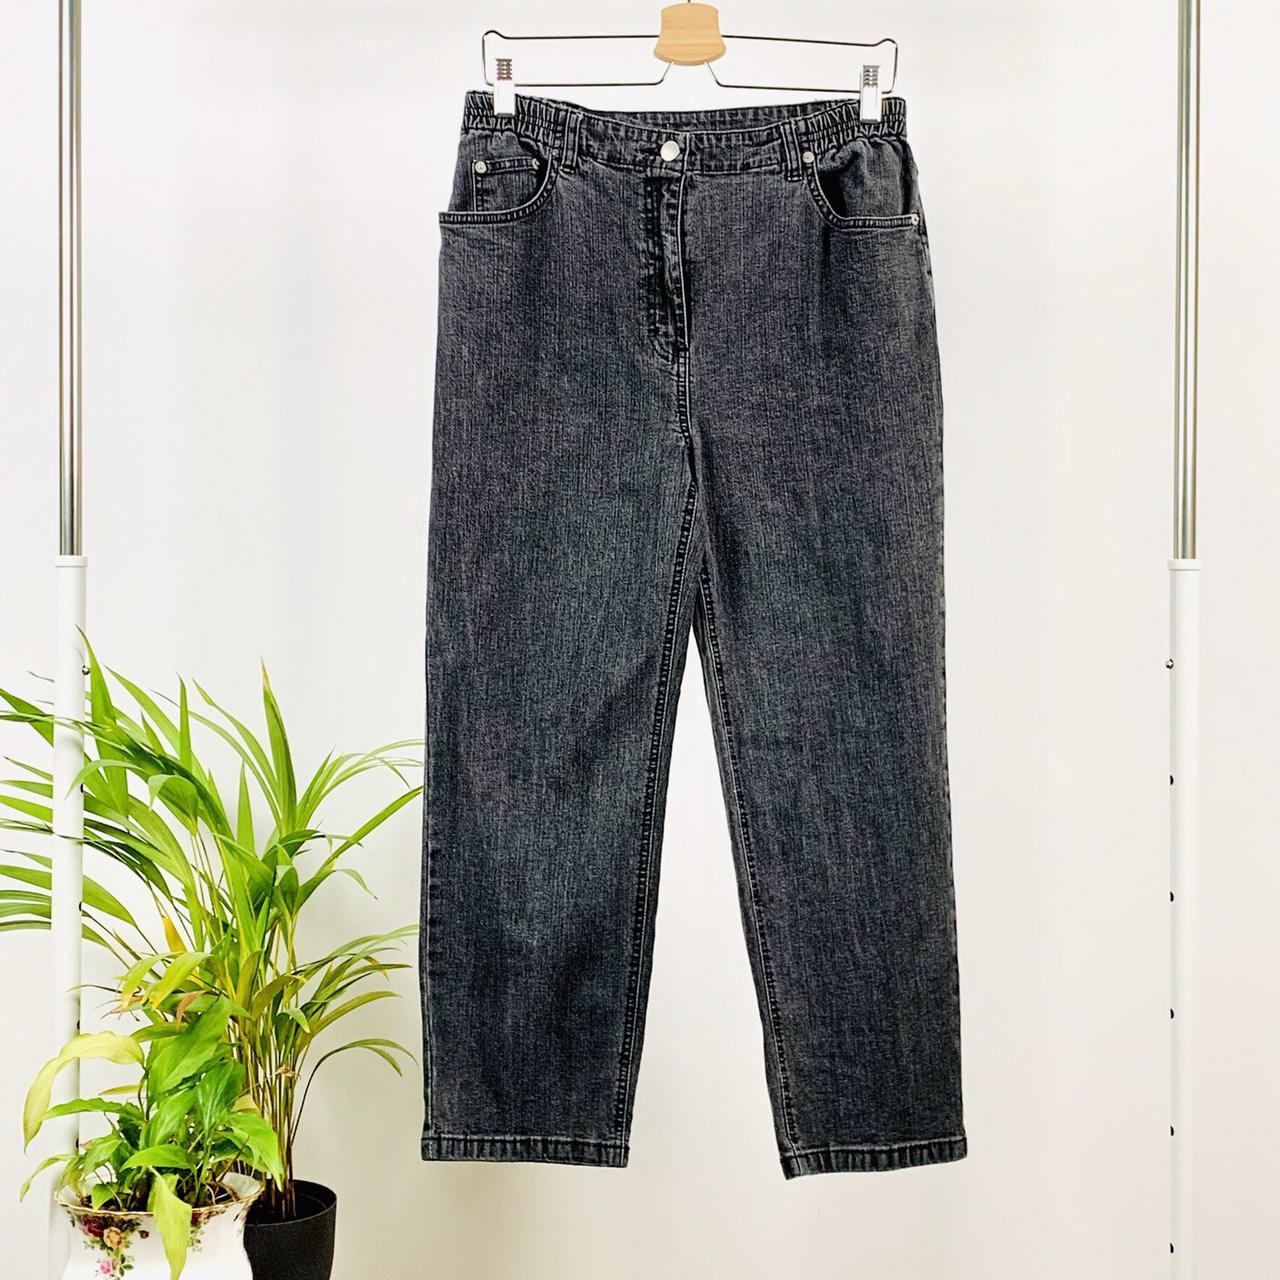 Product Image 2 - Vintage Jeans only get better